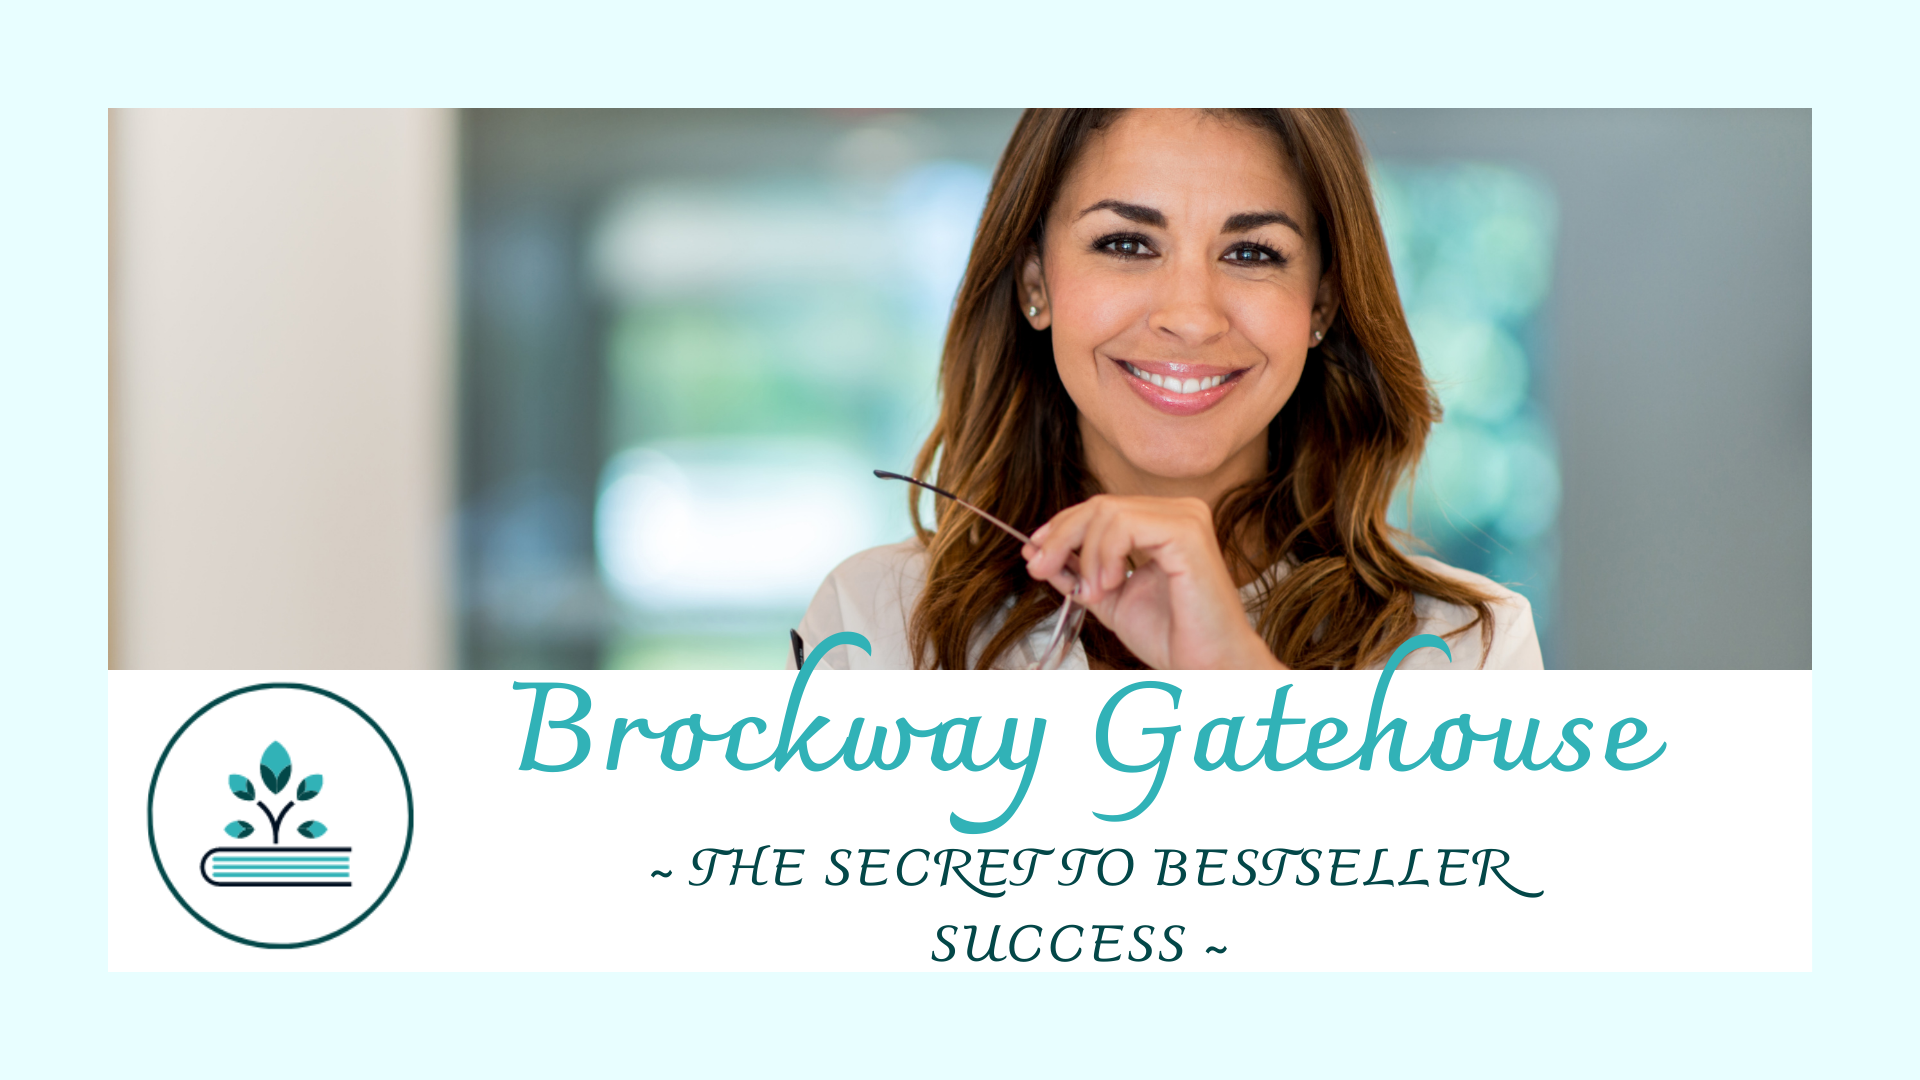 Featured Image 1920x1080 - Brockway Gatehouse - The Secret to Bestseller Success